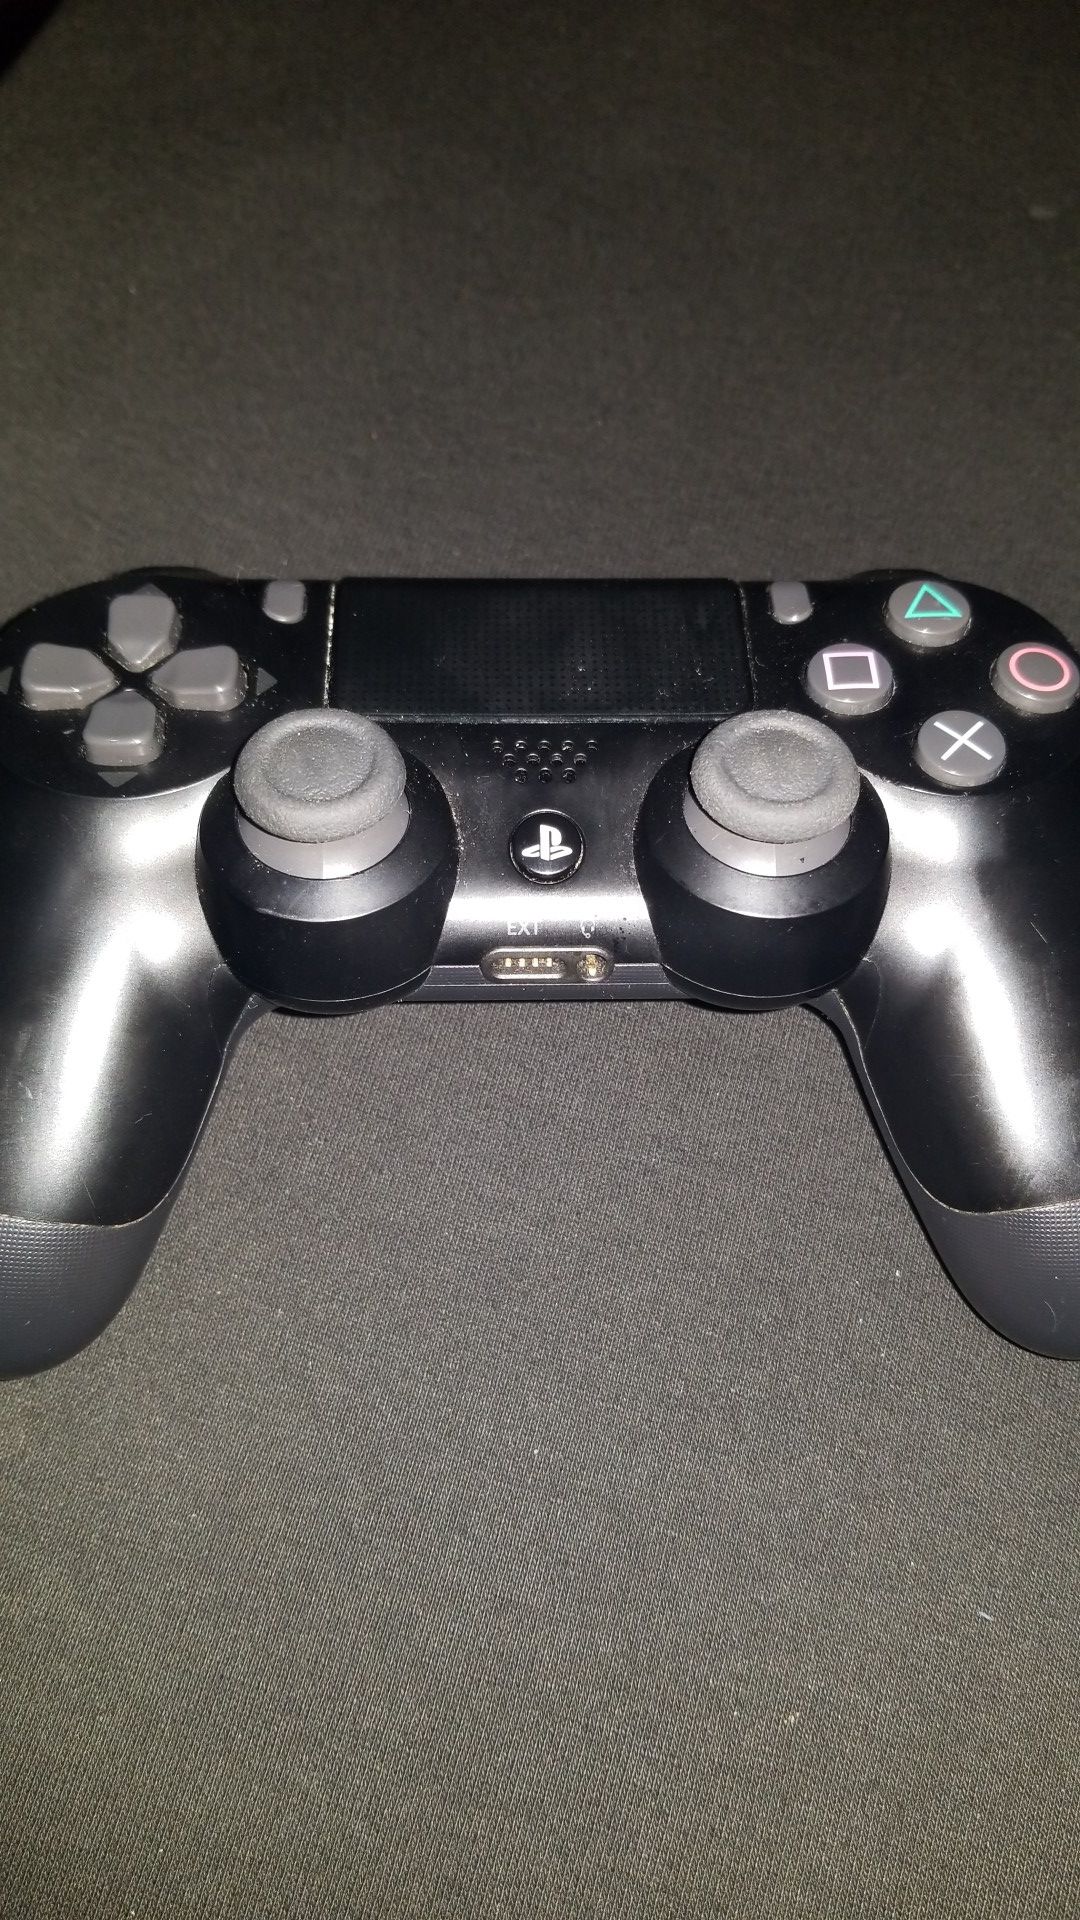 Ps4 controller 2nd generation